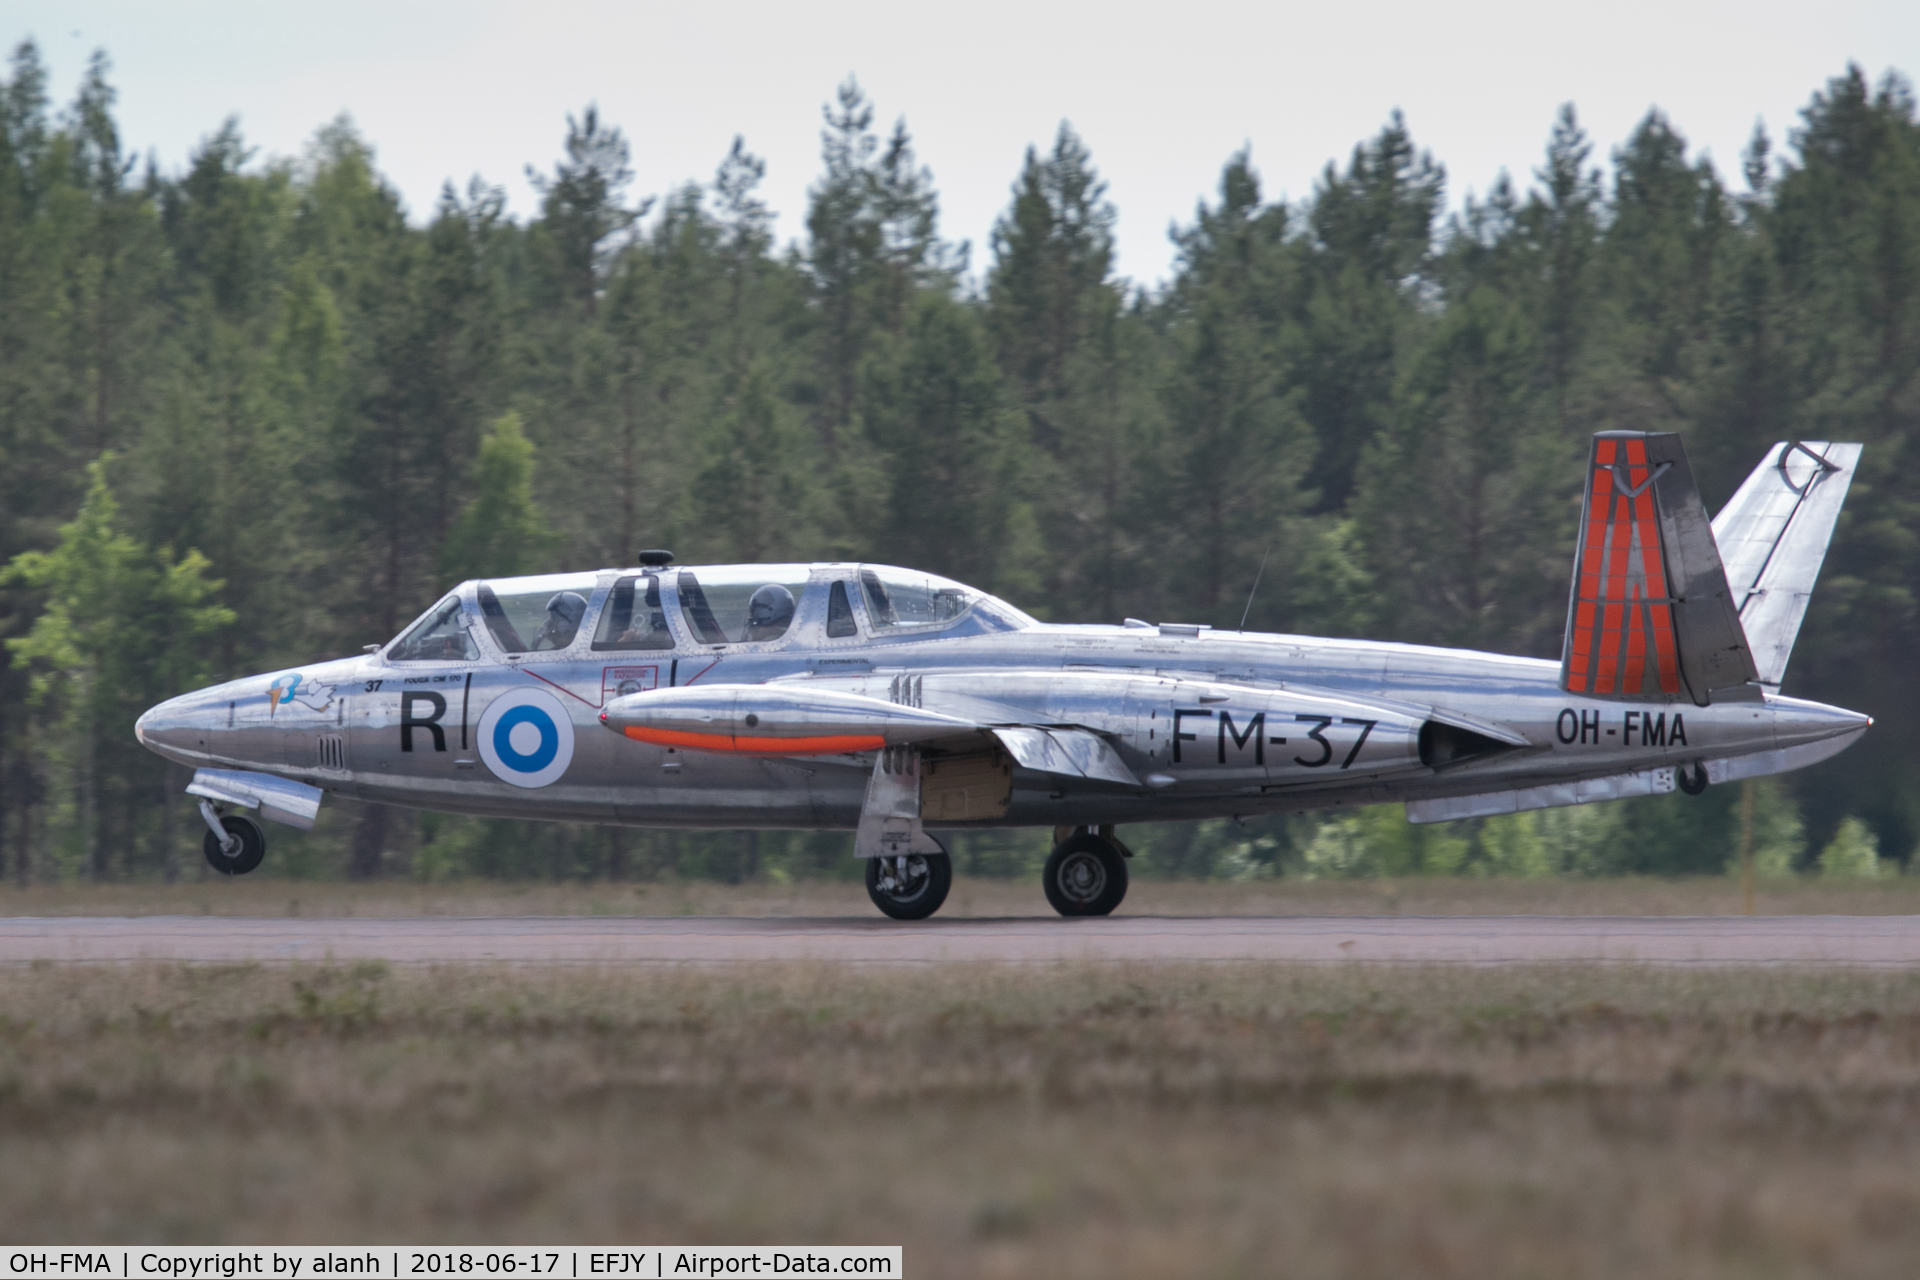 OH-FMA, 1962 Fouga (Valmet) CM-170R Magister C/N FM-37, Landing after displaying at the 100th Anniversary of the Finnish Air Force airshow